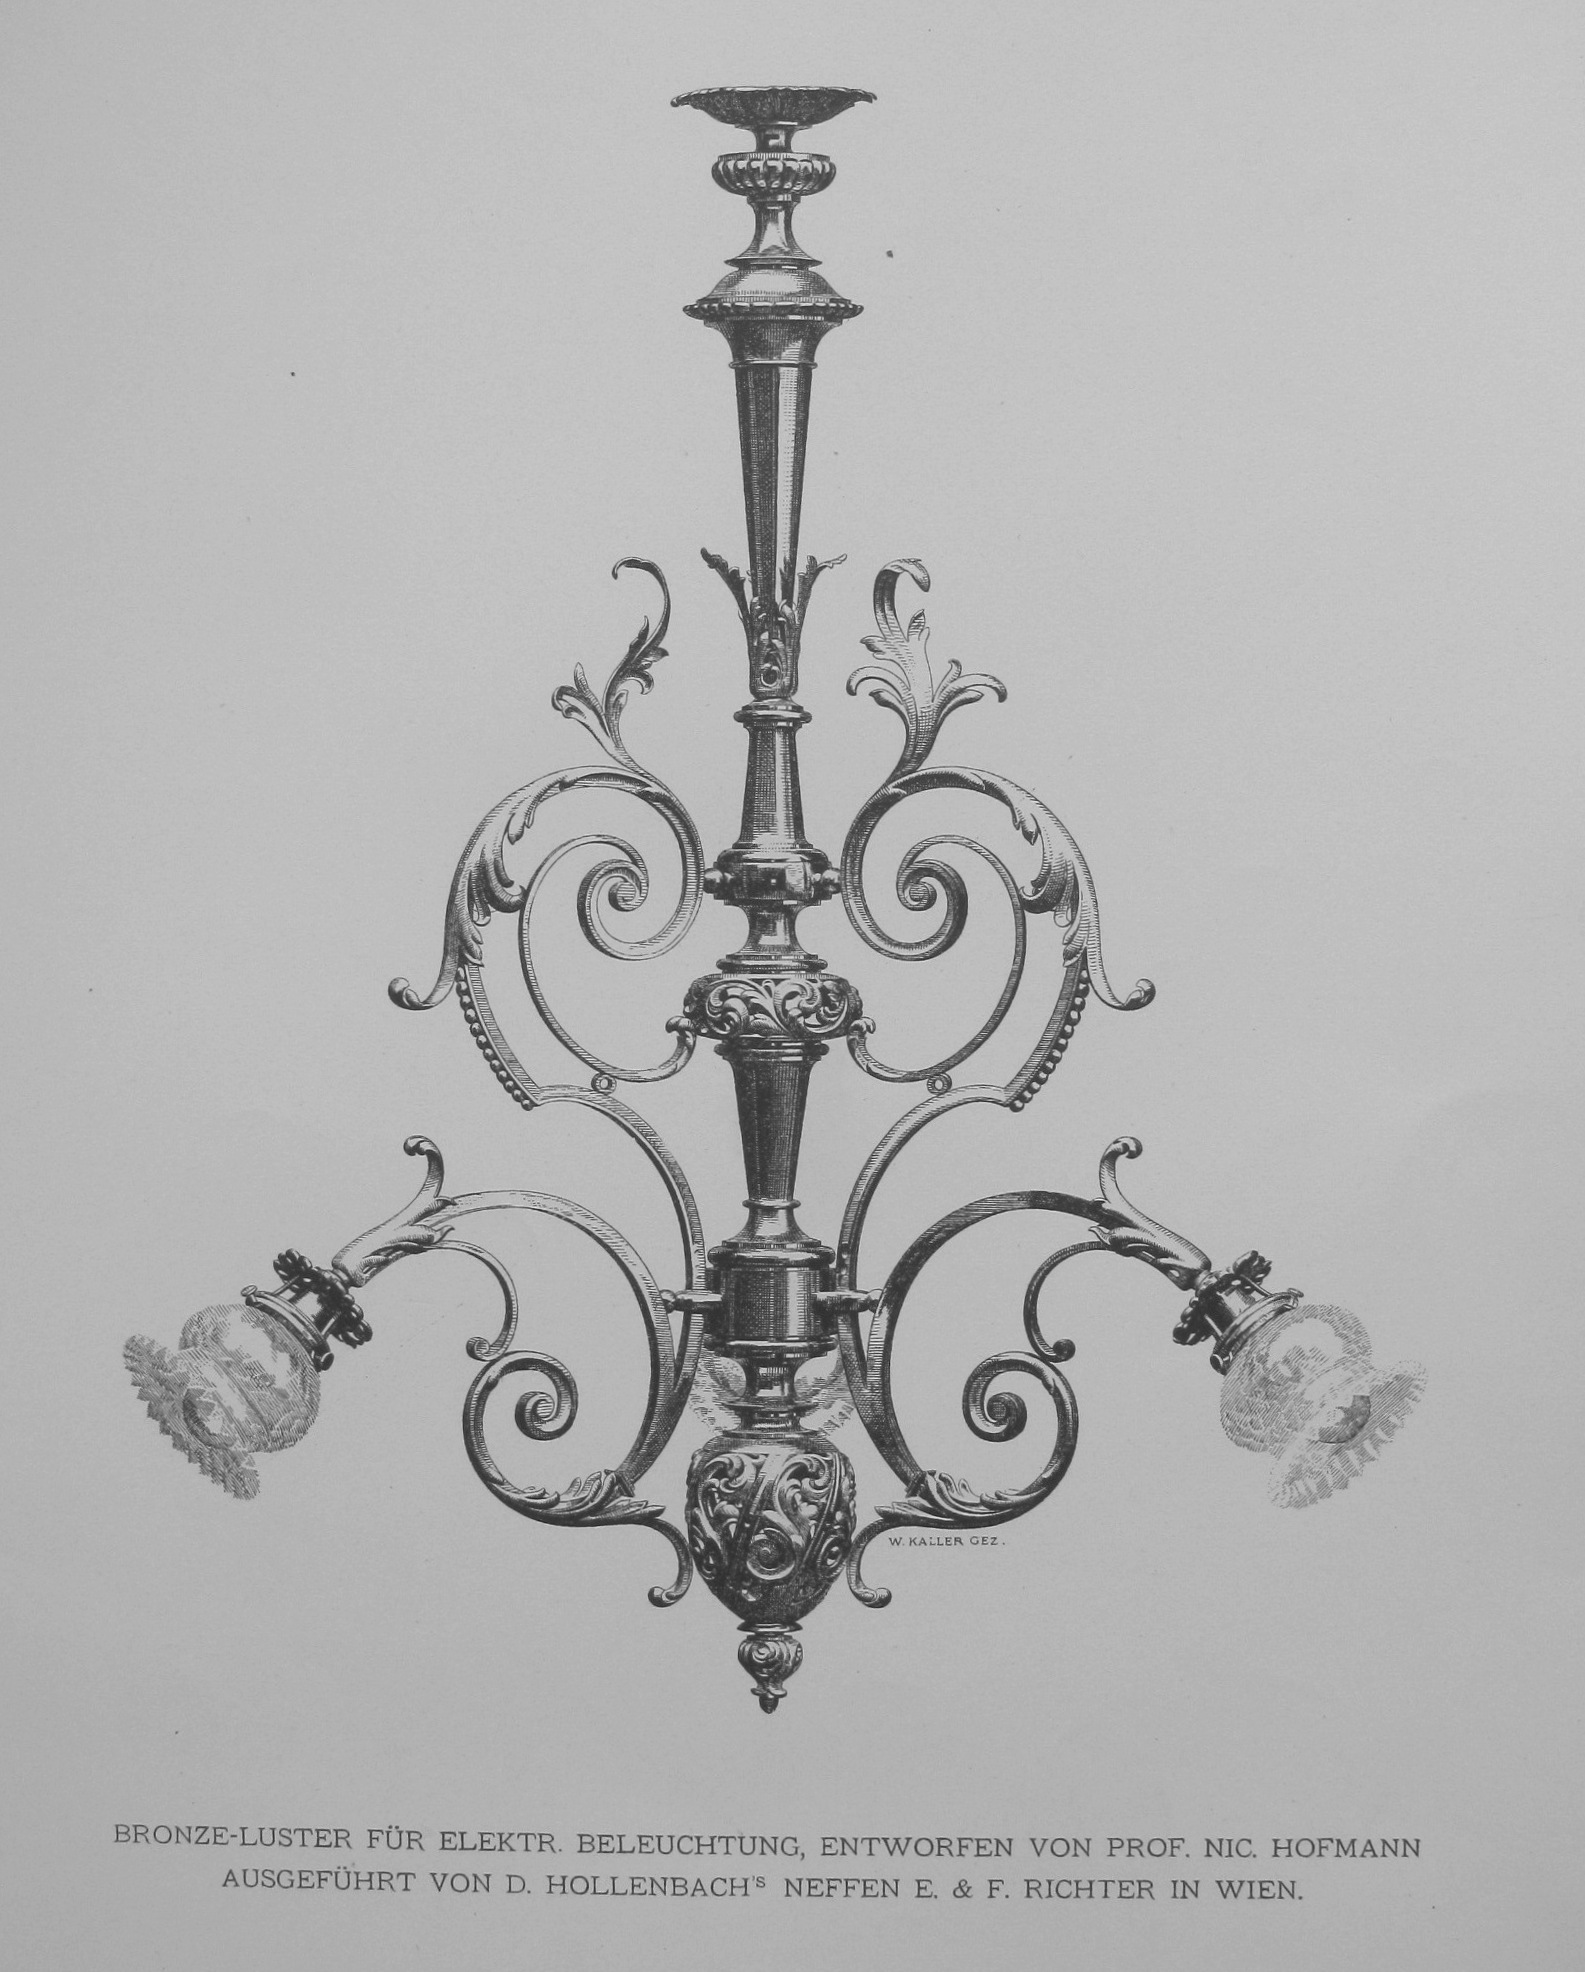 A chandelier designed by a professor from Vienna Nic. Hofmann in 1897. Reproduced from: the Library of the Vilnius Academy of Arts, 7.03(051)Bl-17.